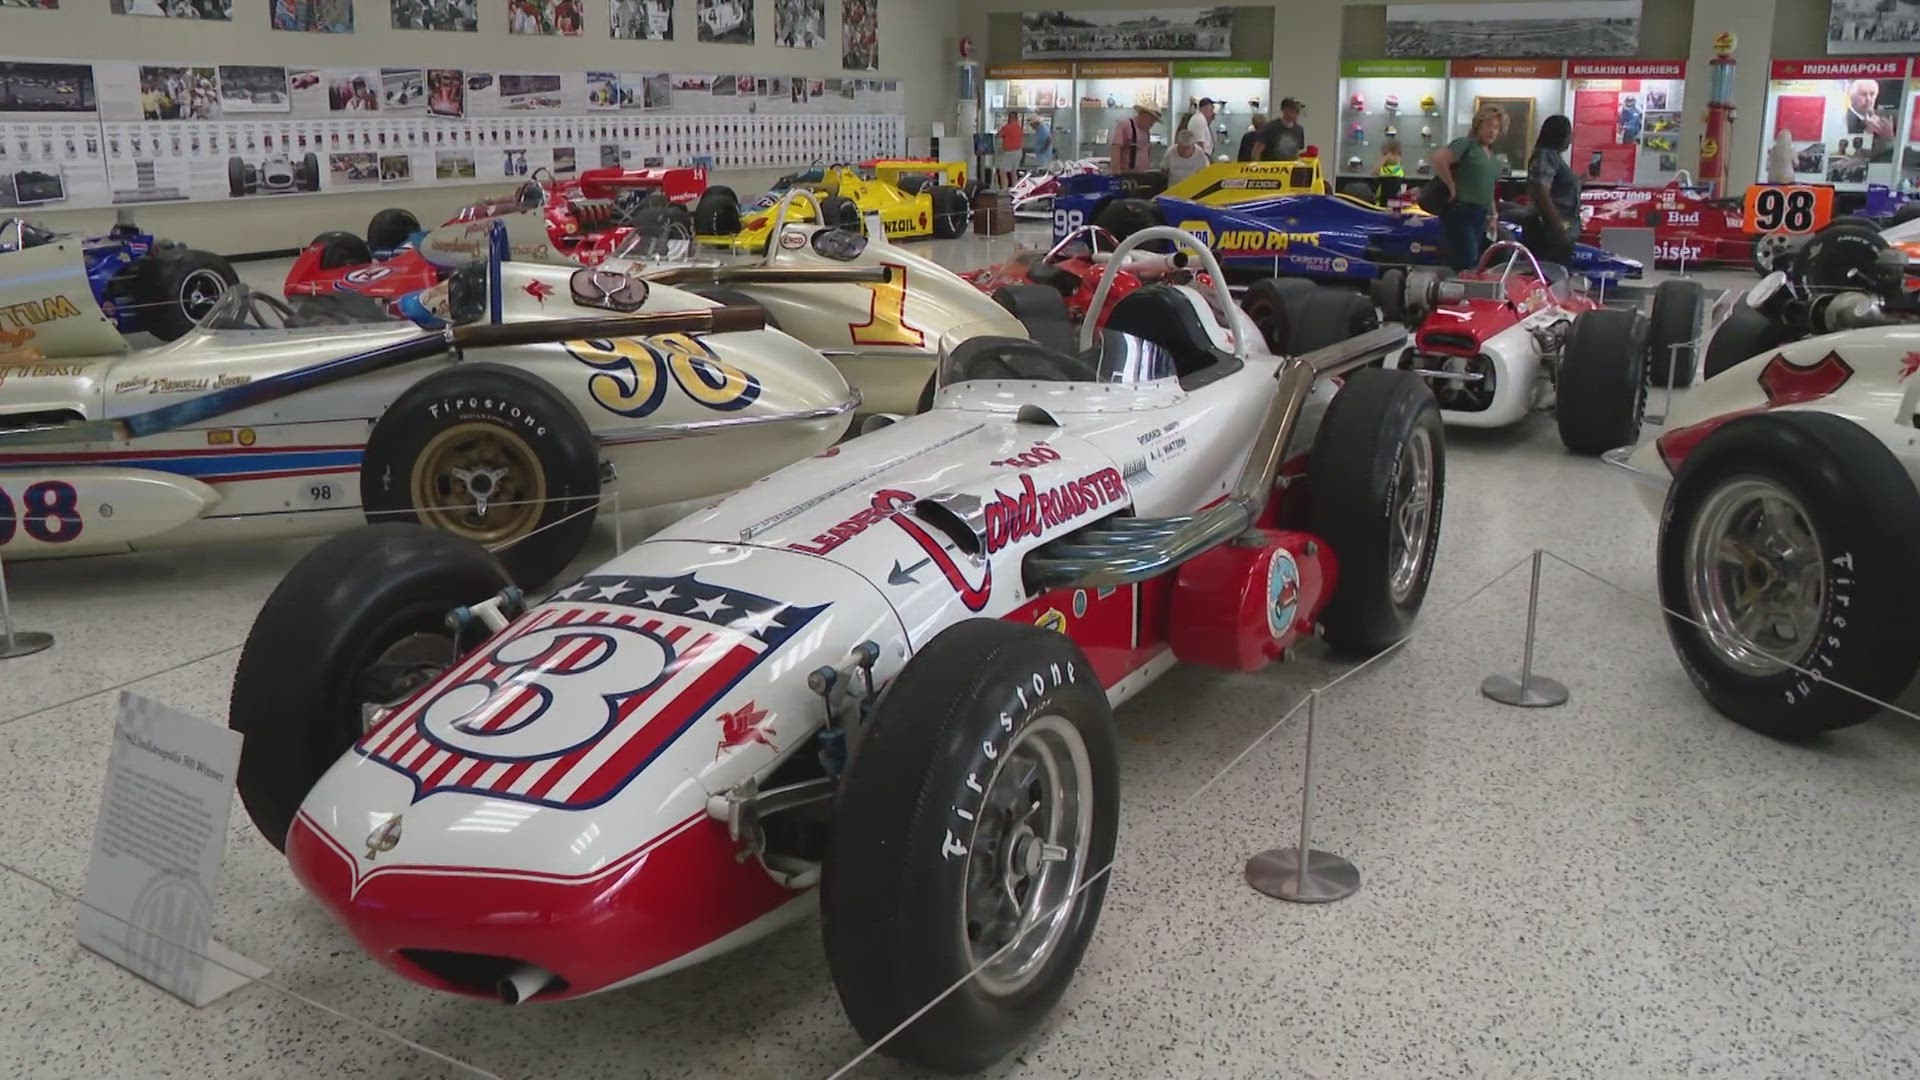 Attention race fans - major construction is underway at the Indianapolis Motor Speedway Museum.